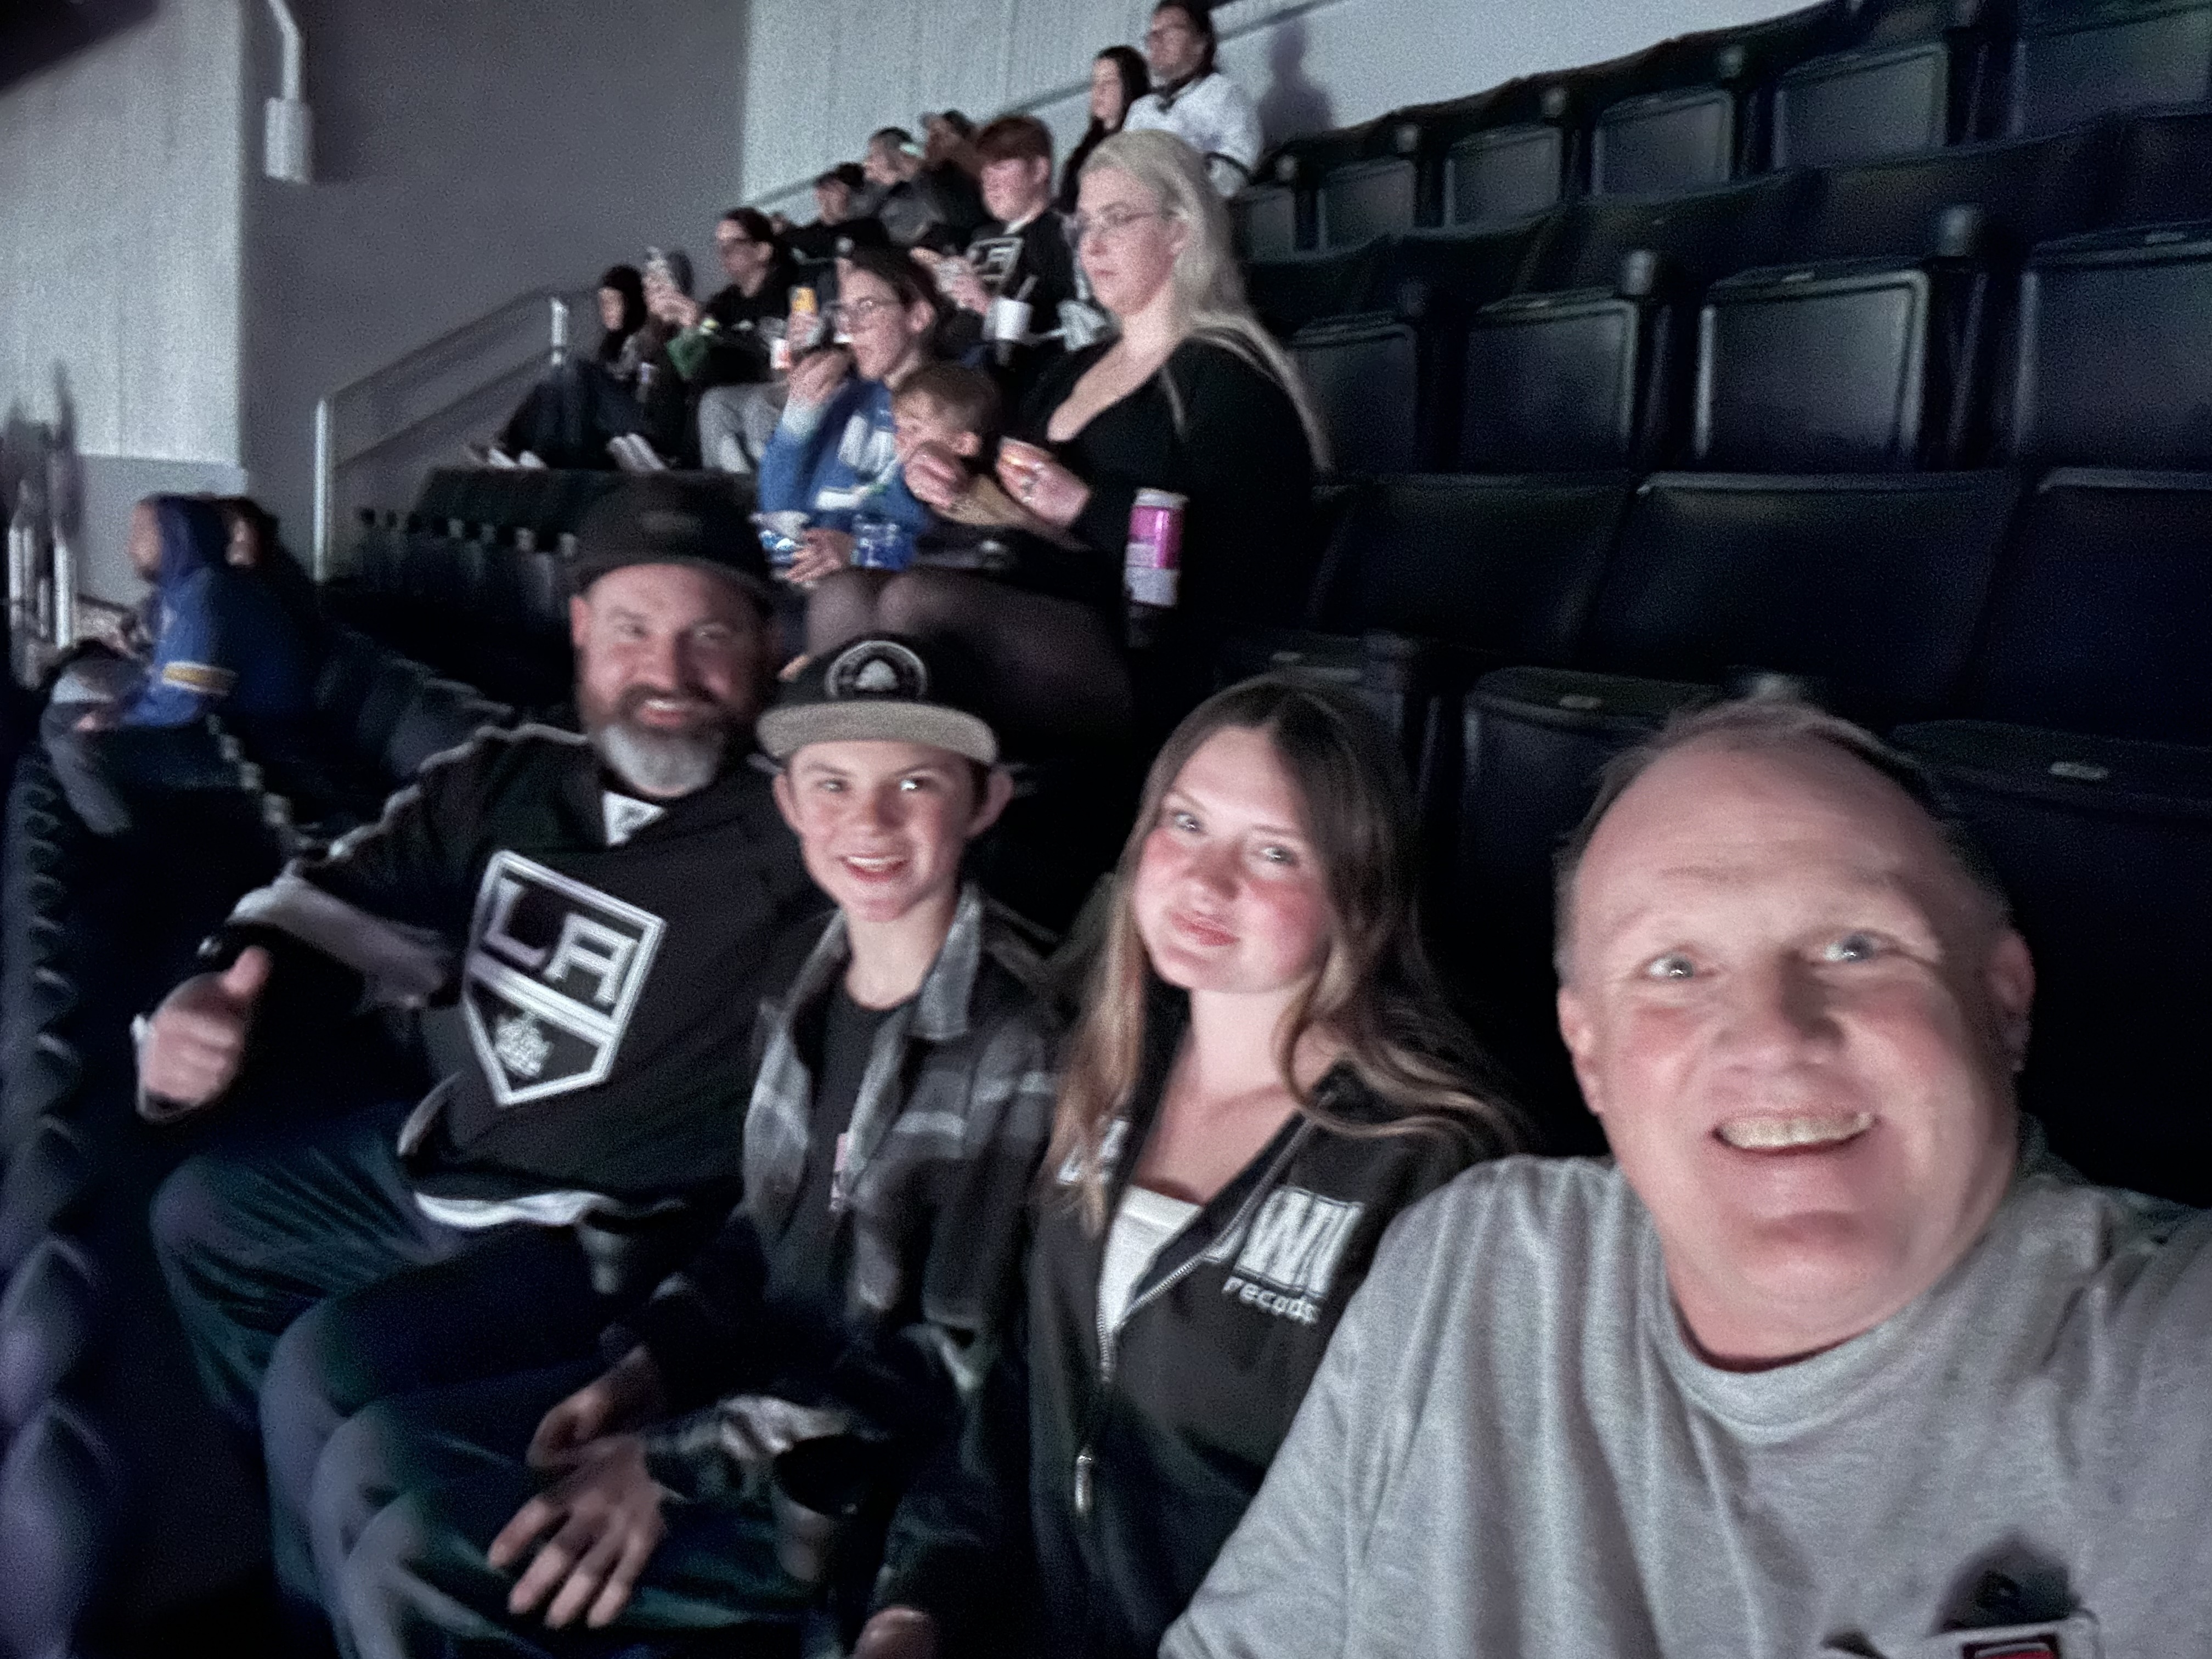 LA Kings - Donate to Seats for Soldiers to help sponsor Military members  and their families to attend an LA Kings game. Select your level of  donation and the Kings will match